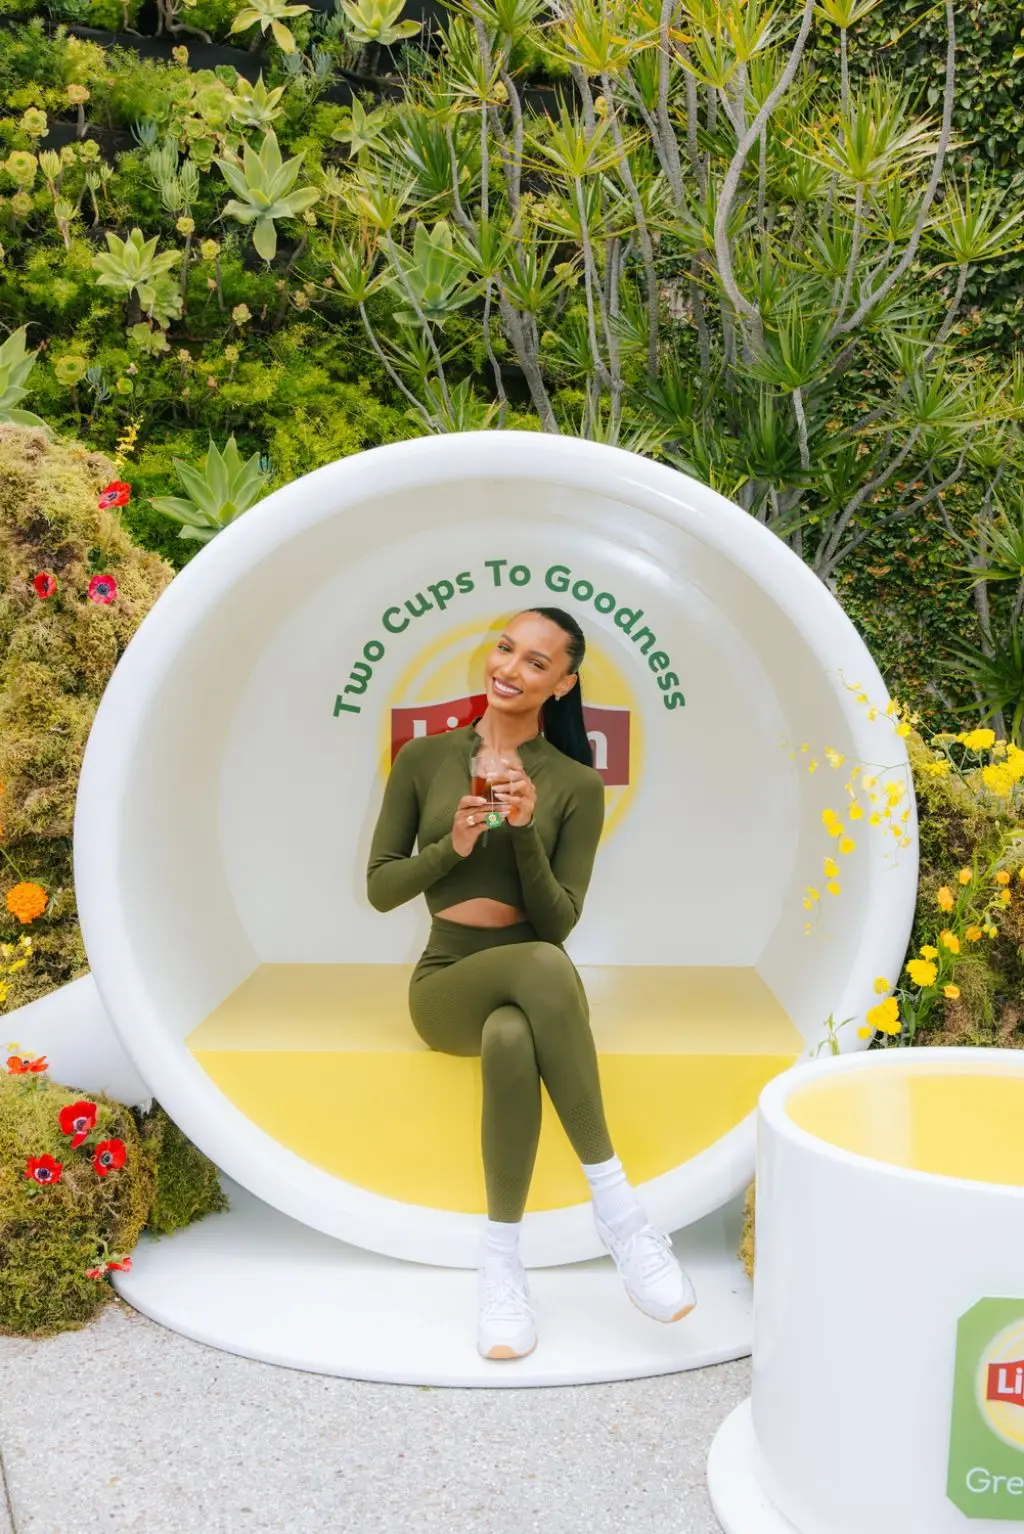 JASMINE TOOKES AT A HIGH TEA LUNCHEON WITH LIPTON GREEN TEA AT THE MAYBOURNE BEVERLY HILLS